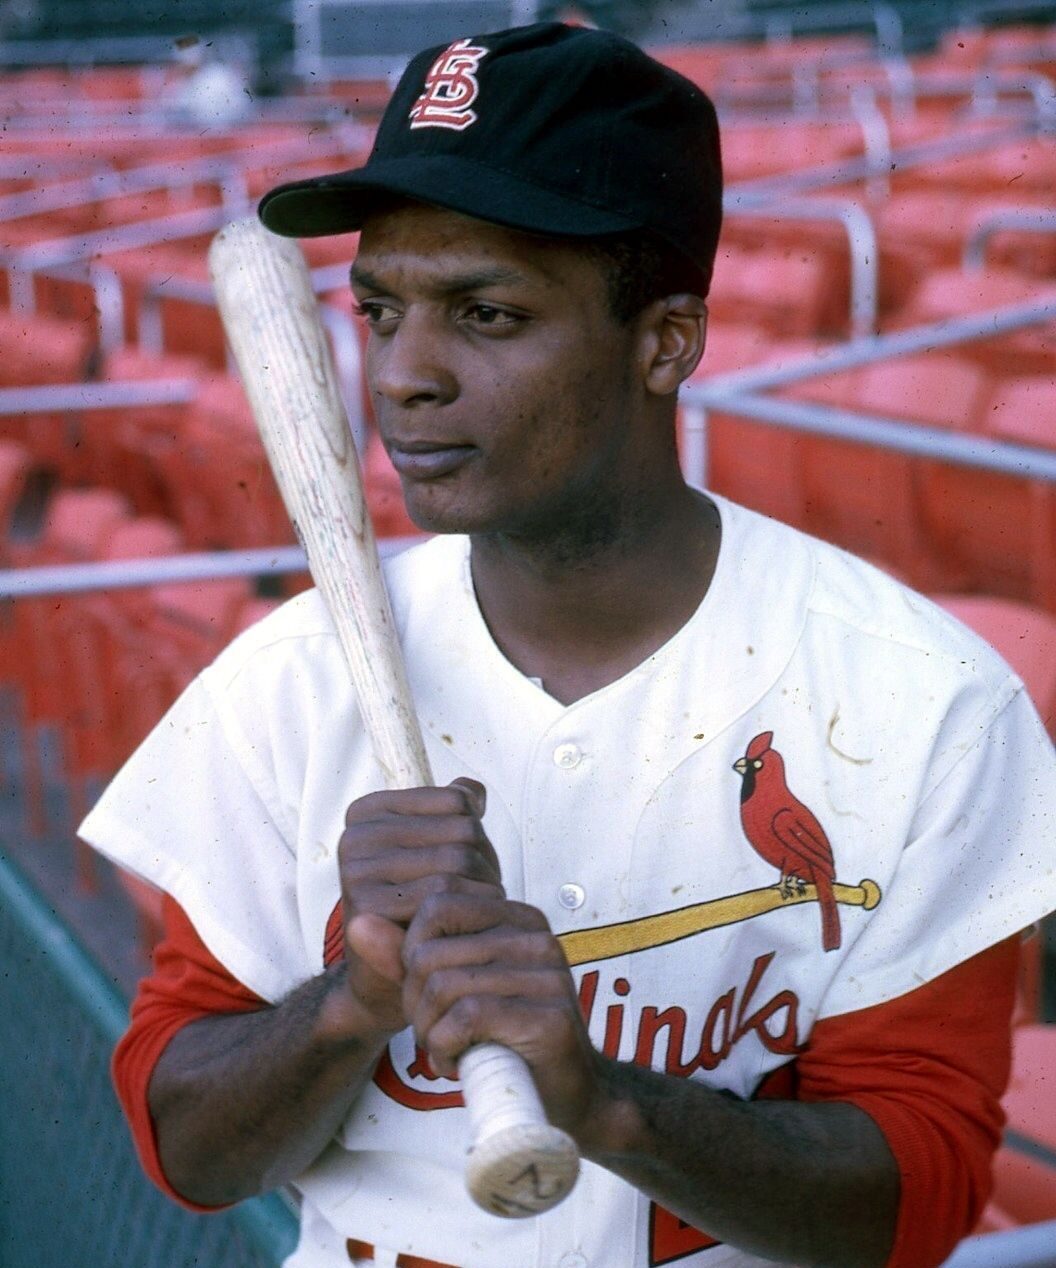 curt flood made agency possible other